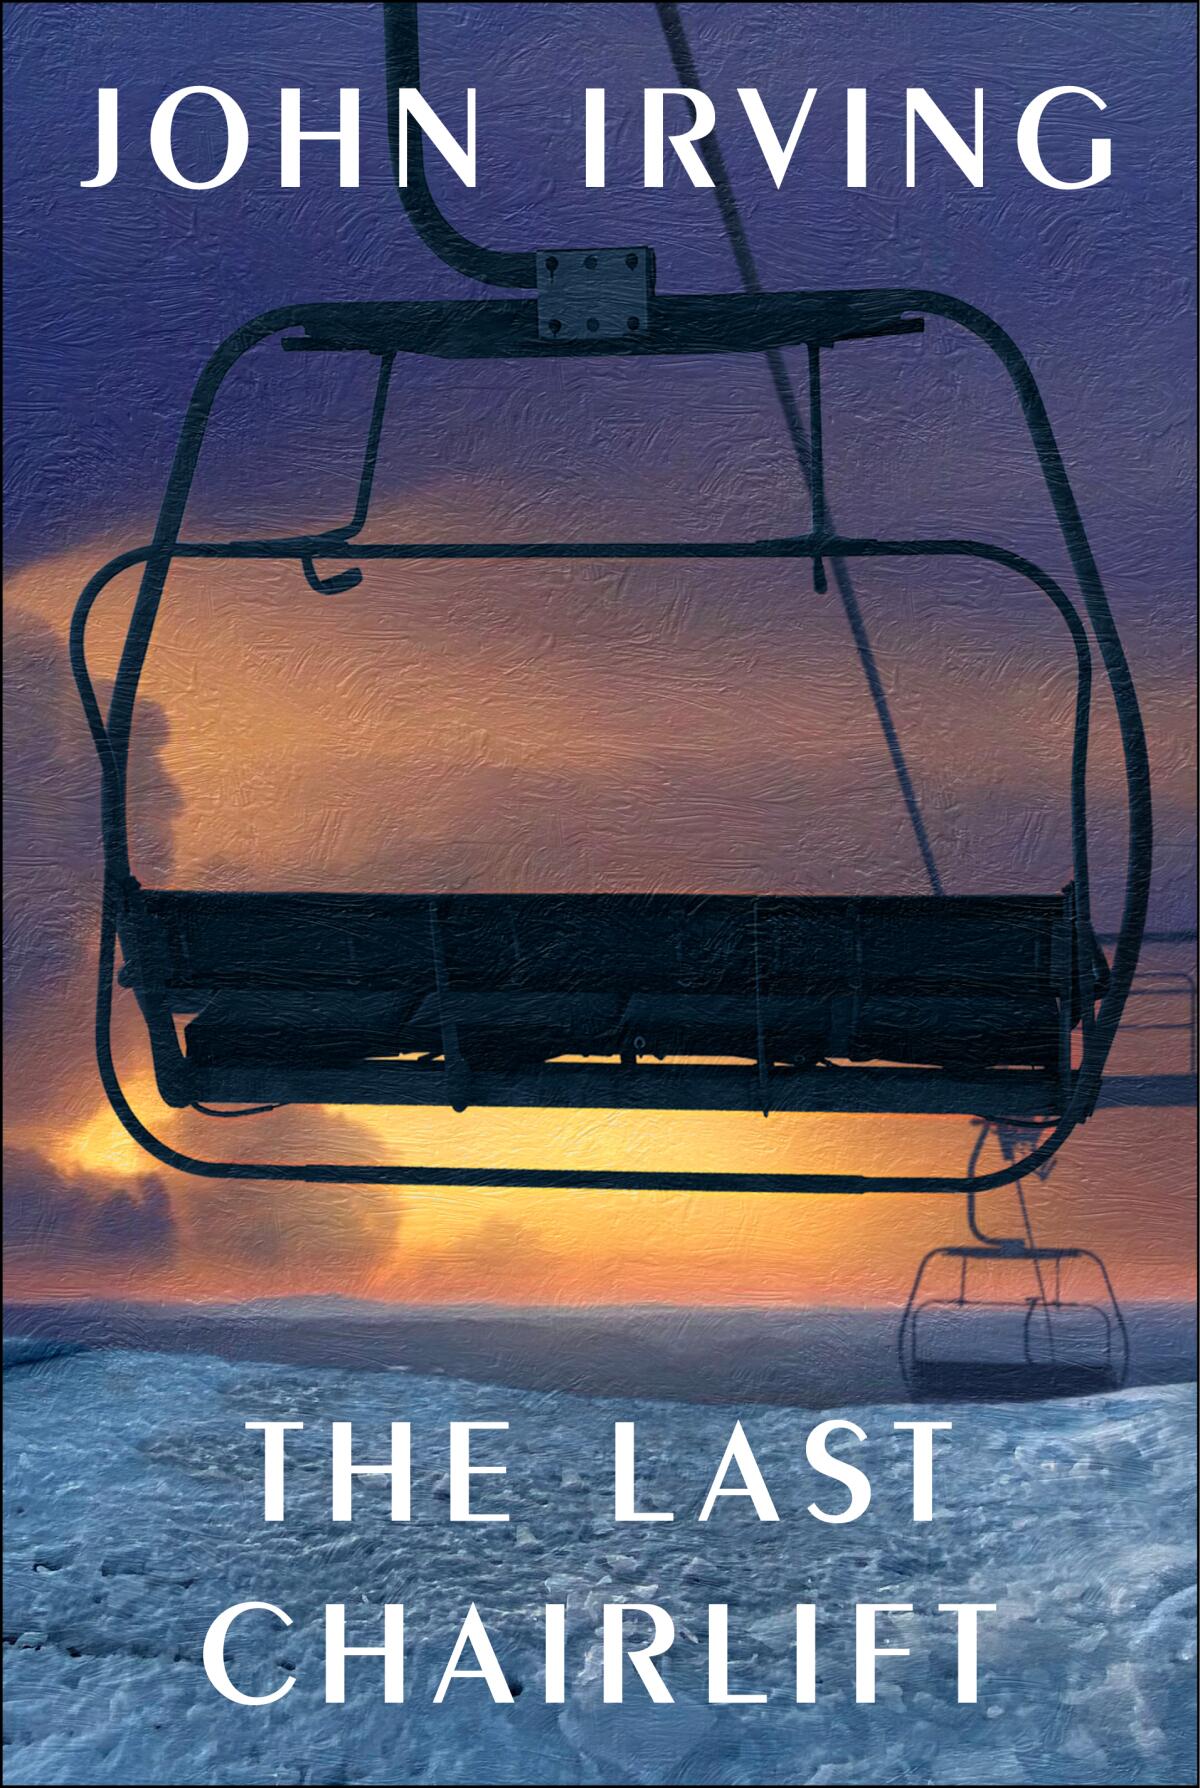 "The Last Chairlift" by John Irving